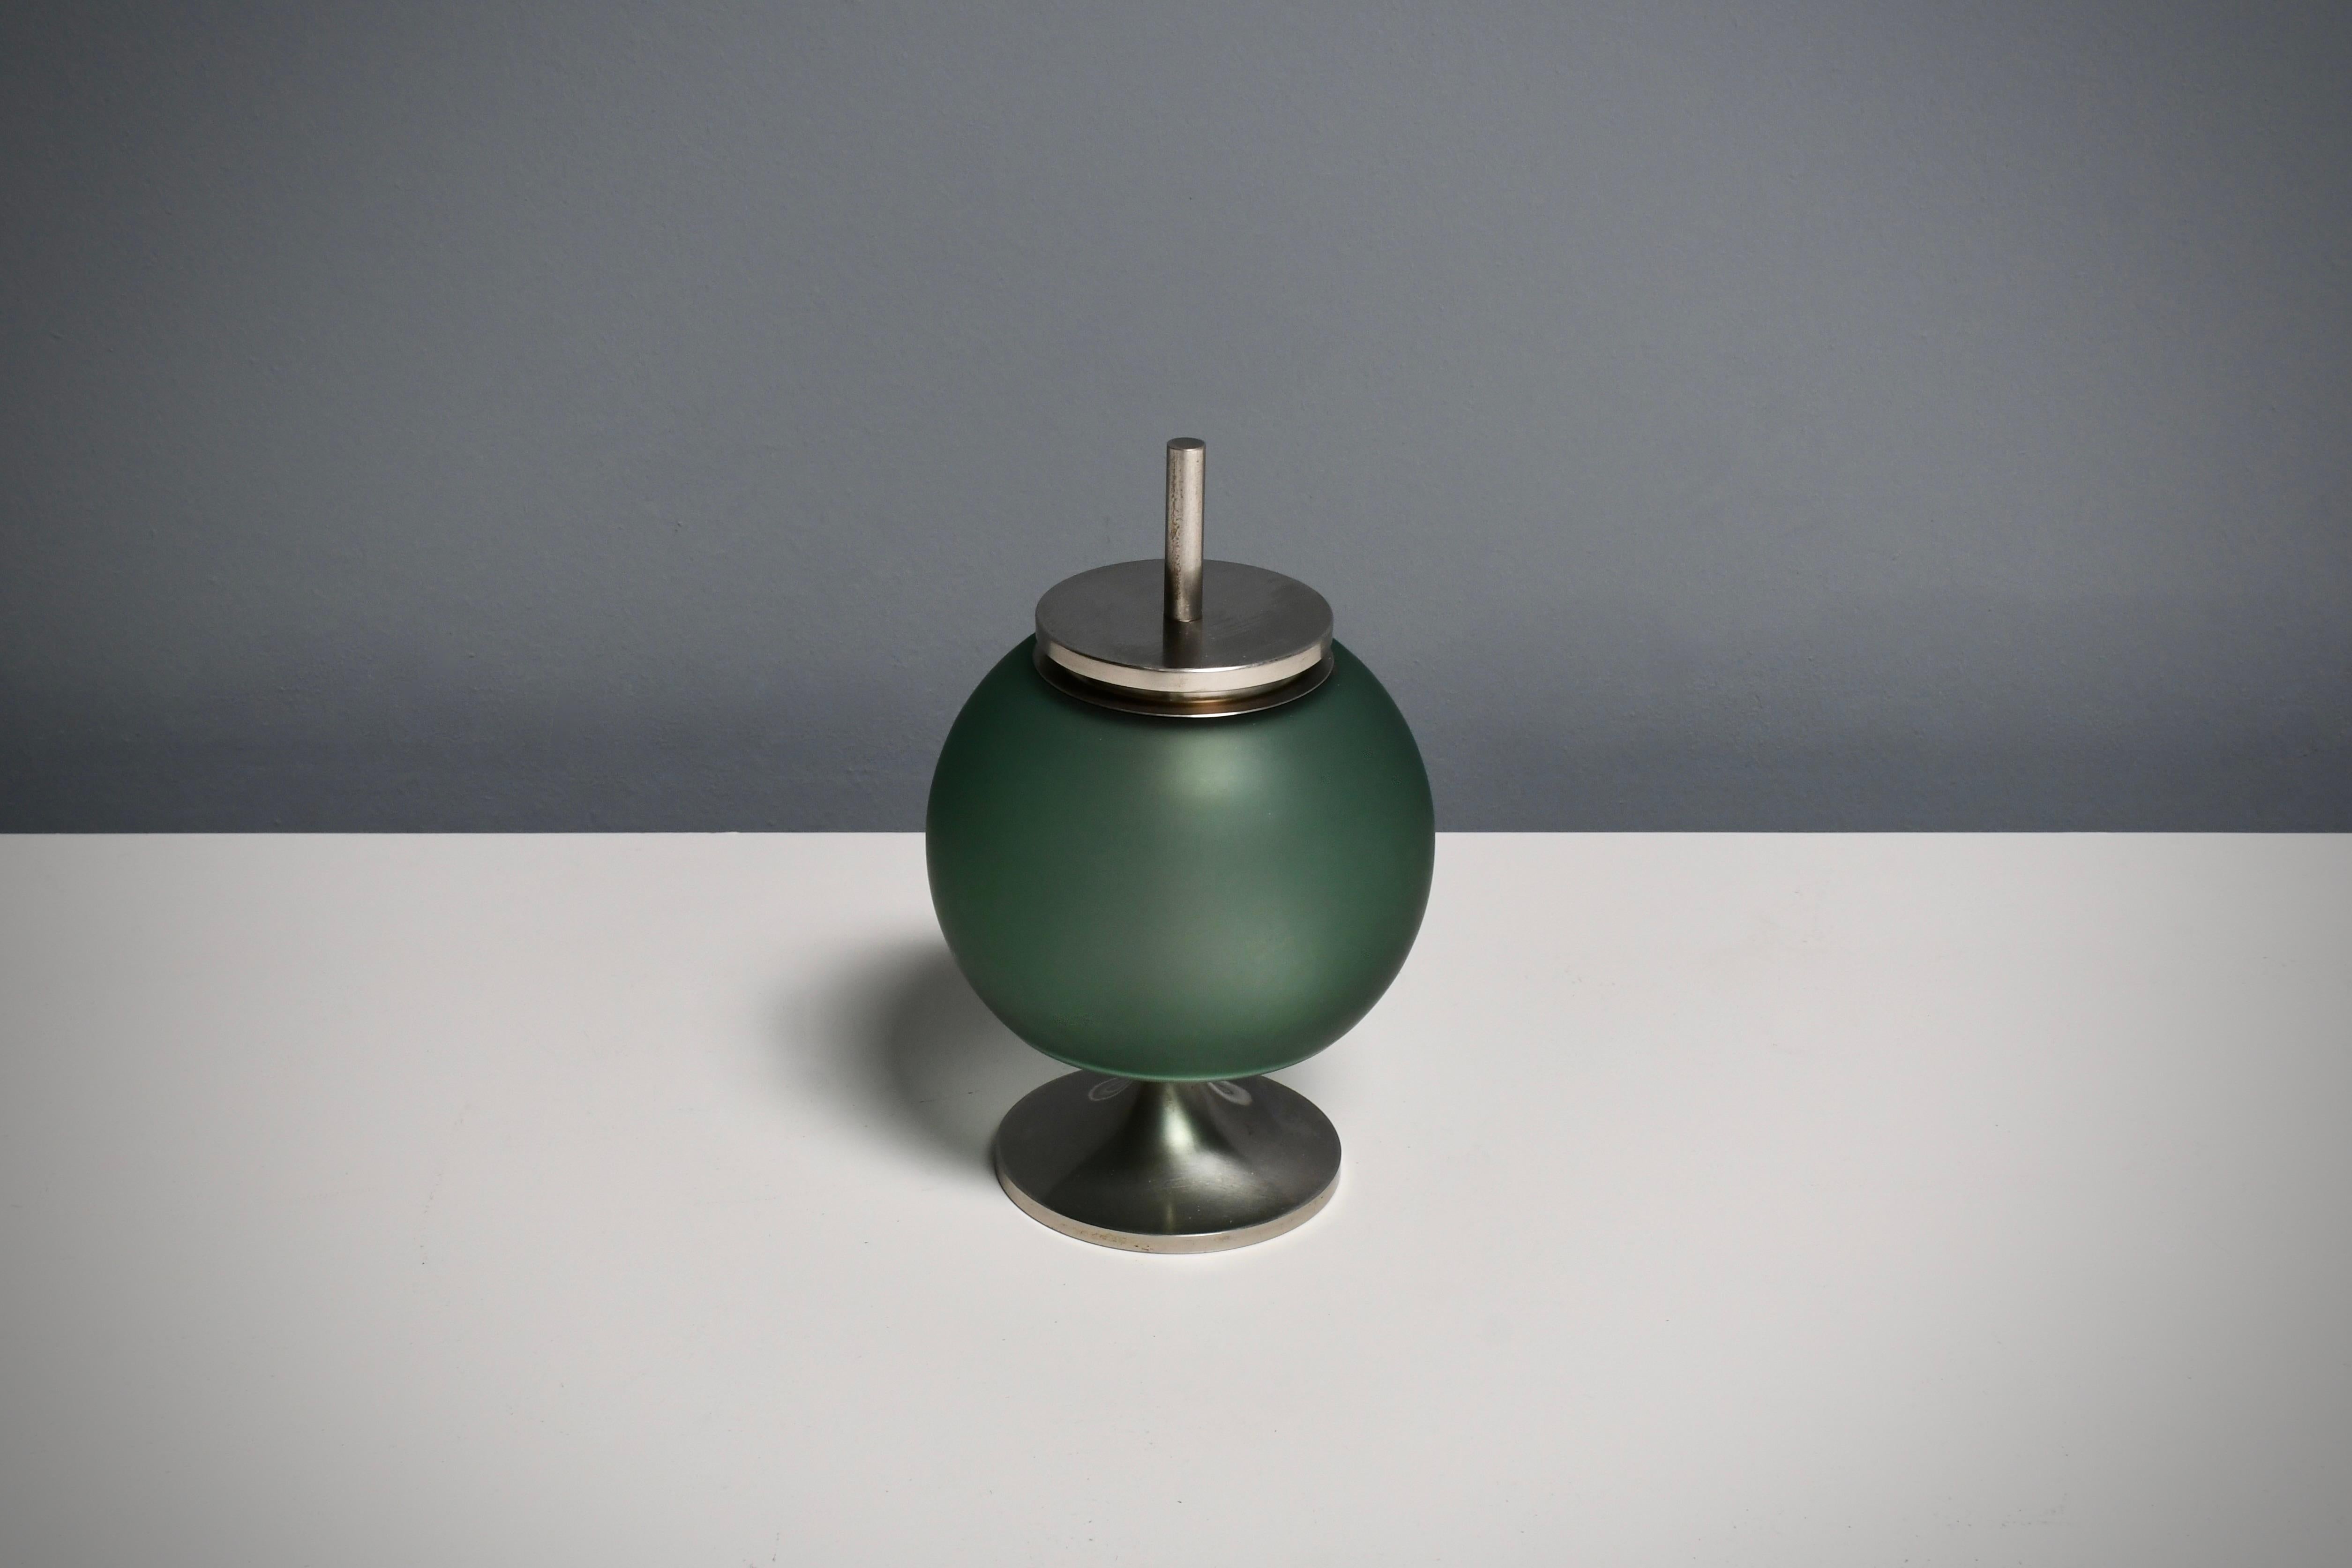 'Chi’ Table Lamp by Emma Gismondi Schweinberger for Artemide, 1962

Small ‘Chi’ table lamp in very good condition.

Designed by Emma Gismondi Schweinberger in 1962.

Manufactured by Artemide

The base of this elegant table lamp is issued in nickel